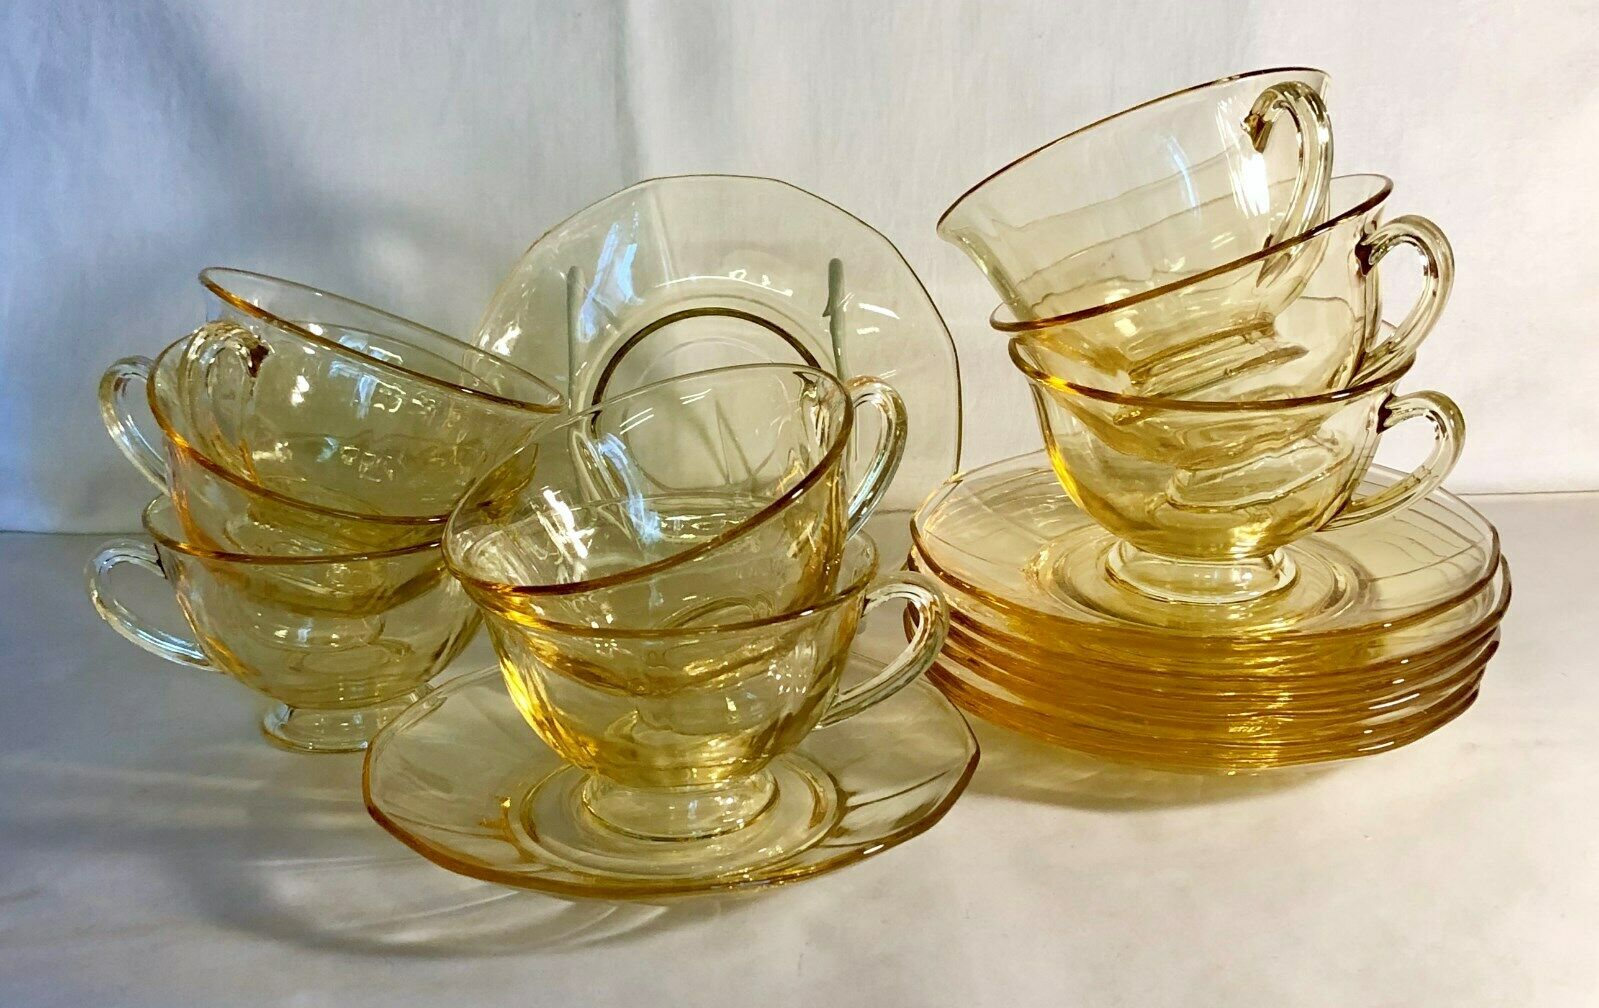 8 Fostoria Topaz Fairfax Footed Cups And Saucers